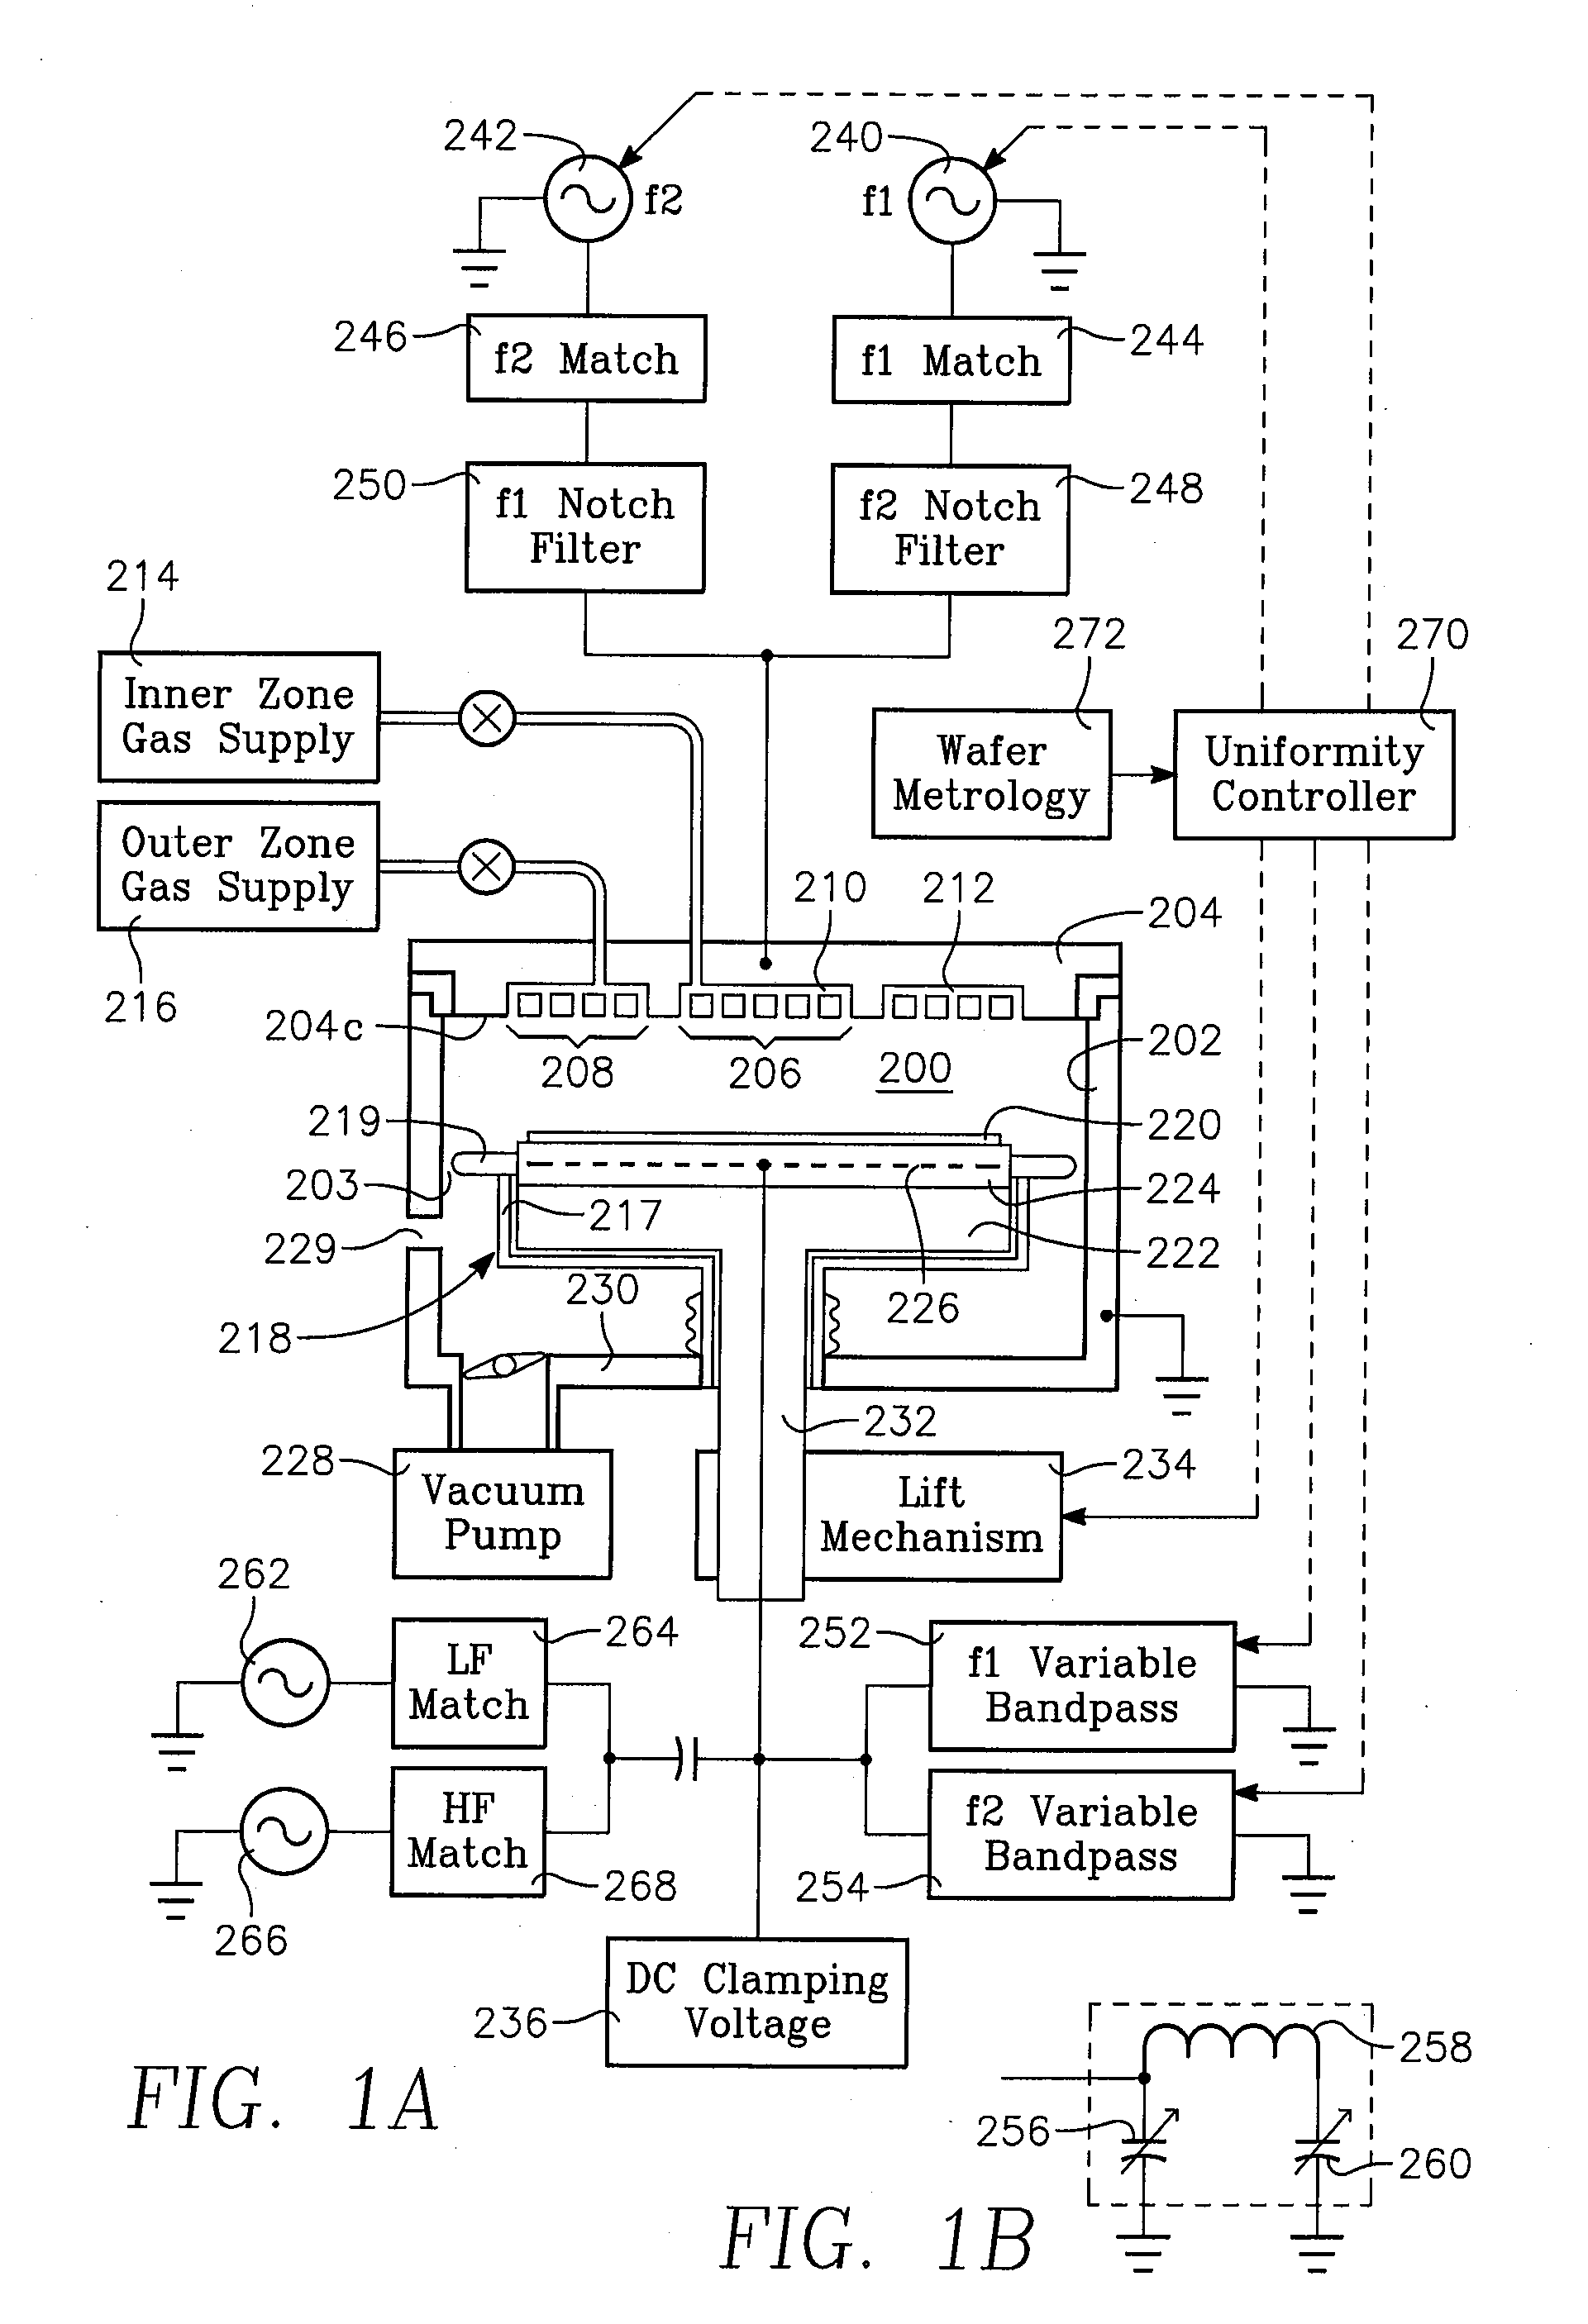 Plasma reactor with ion distribution uniformity controller employing plural vhf sources